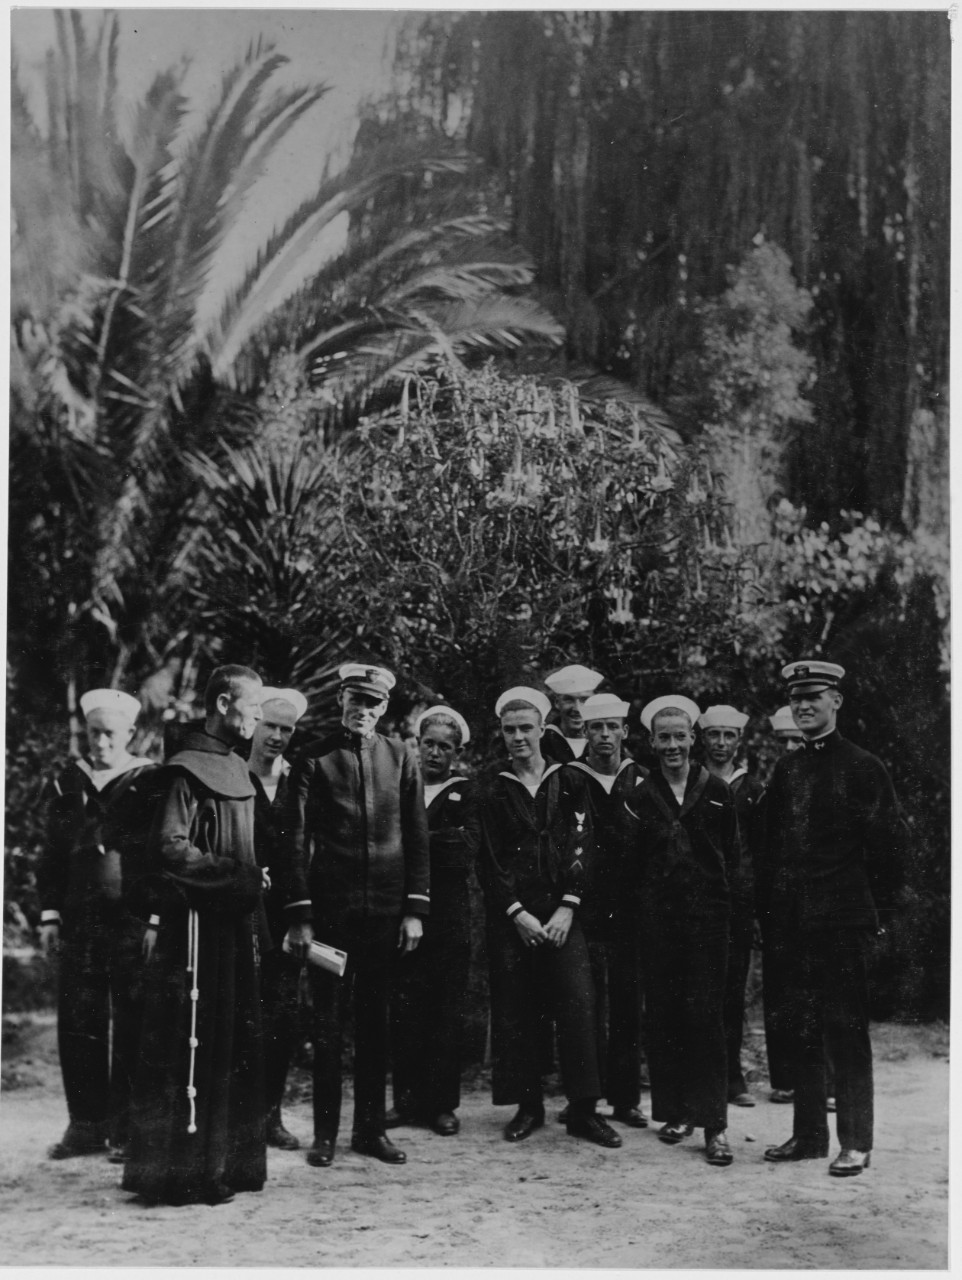 Men of the Pacific Fleet being shown around the Santa Barbara Mission